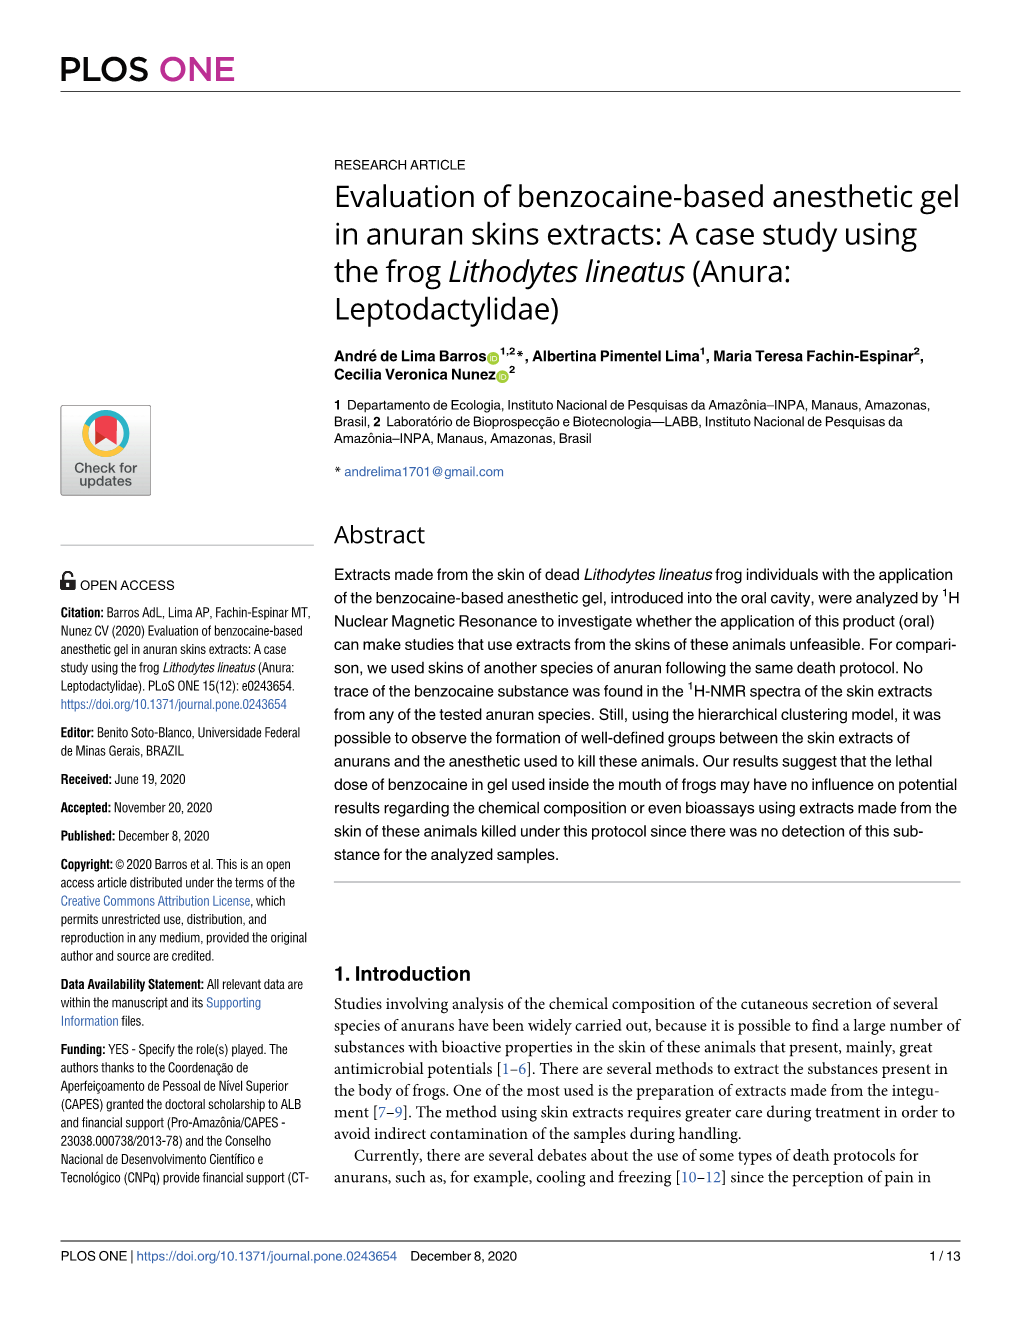 Evaluation of Benzocaine-Based Anesthetic Gel in Anuran Skins Extracts: a Case Study Using the Frog Lithodytes Lineatus (Anura: Leptodactylidae)